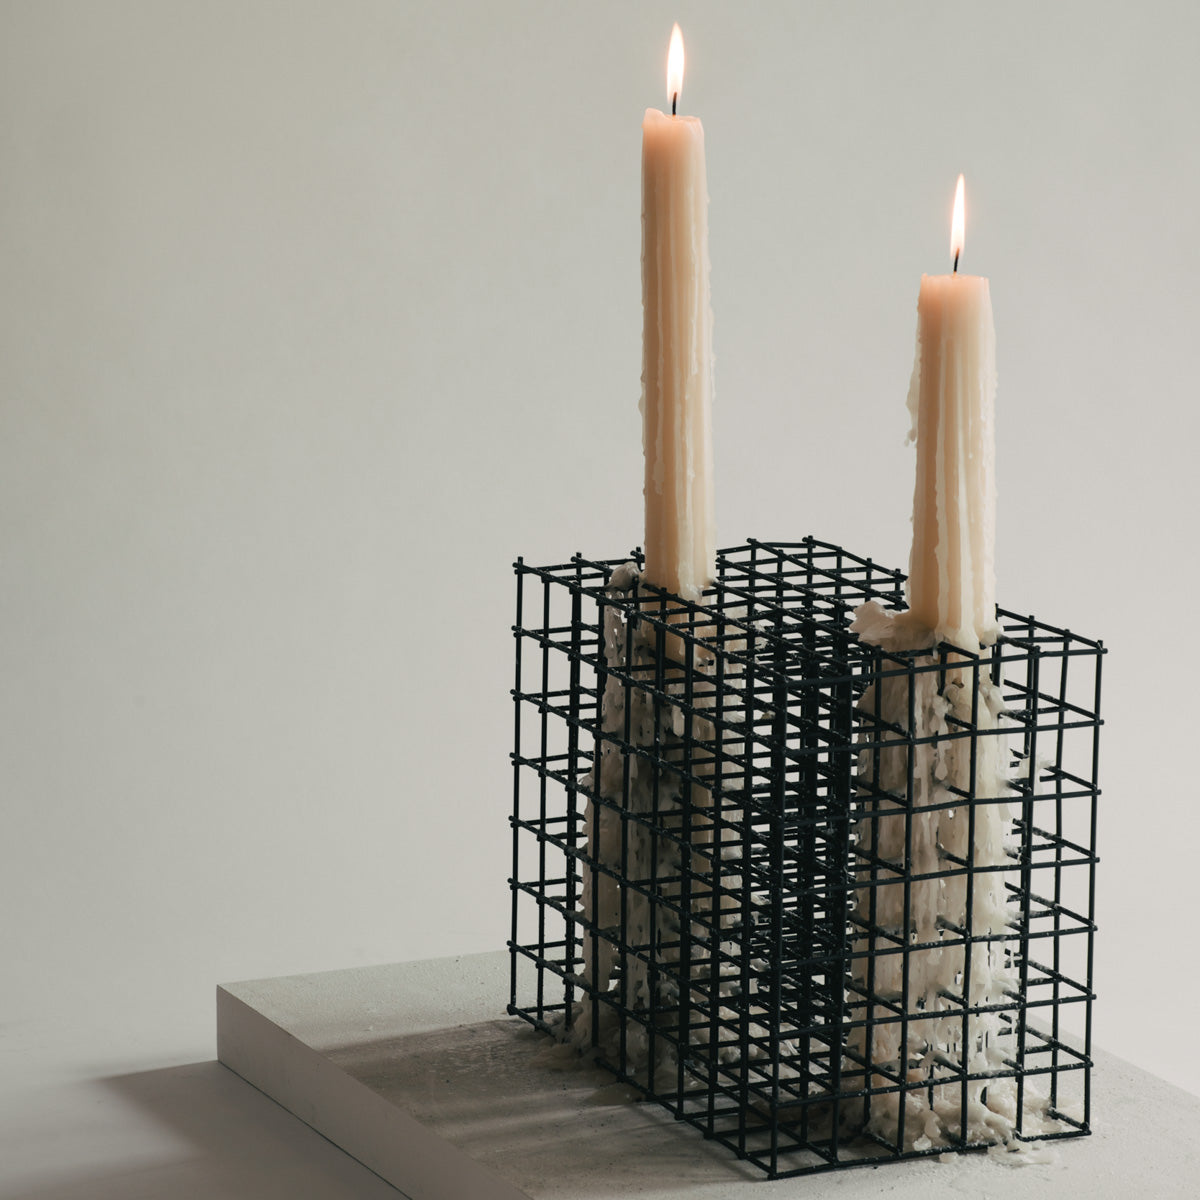 Candle Grids